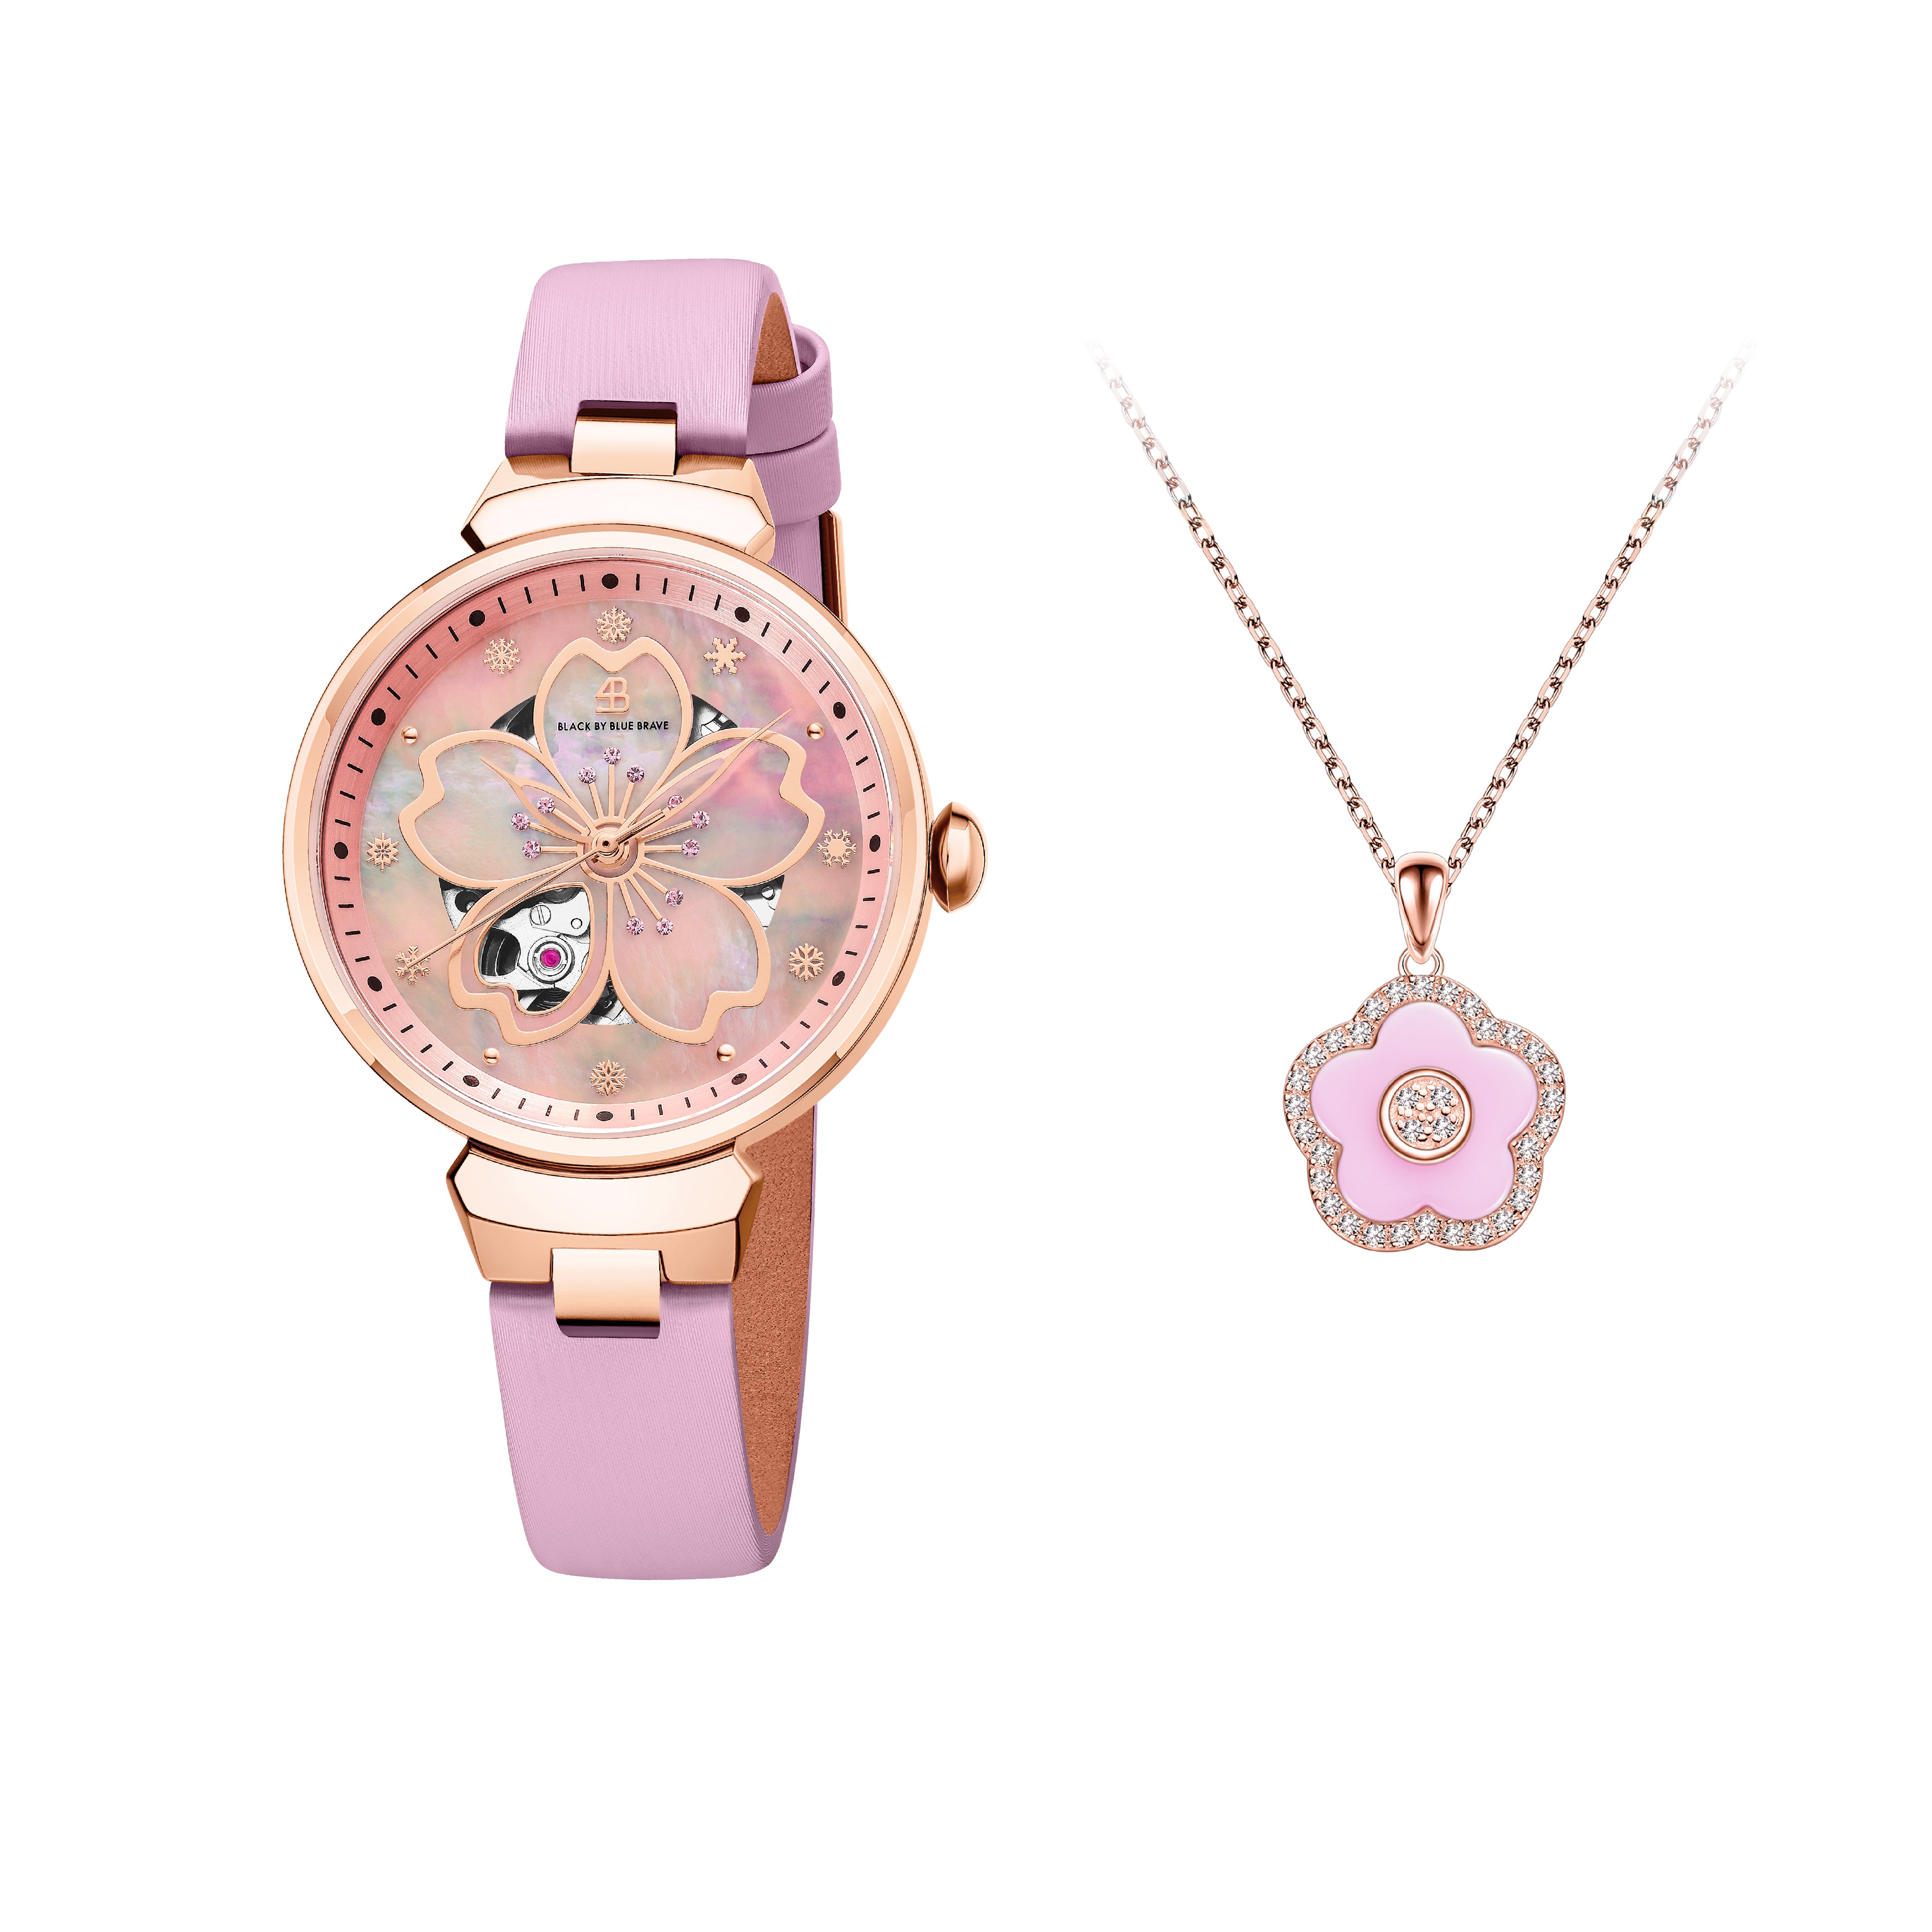 Pink Cherry Blossom 36mm Automatic Watch & Rosegold Flower Necklace & Pink Ceramic